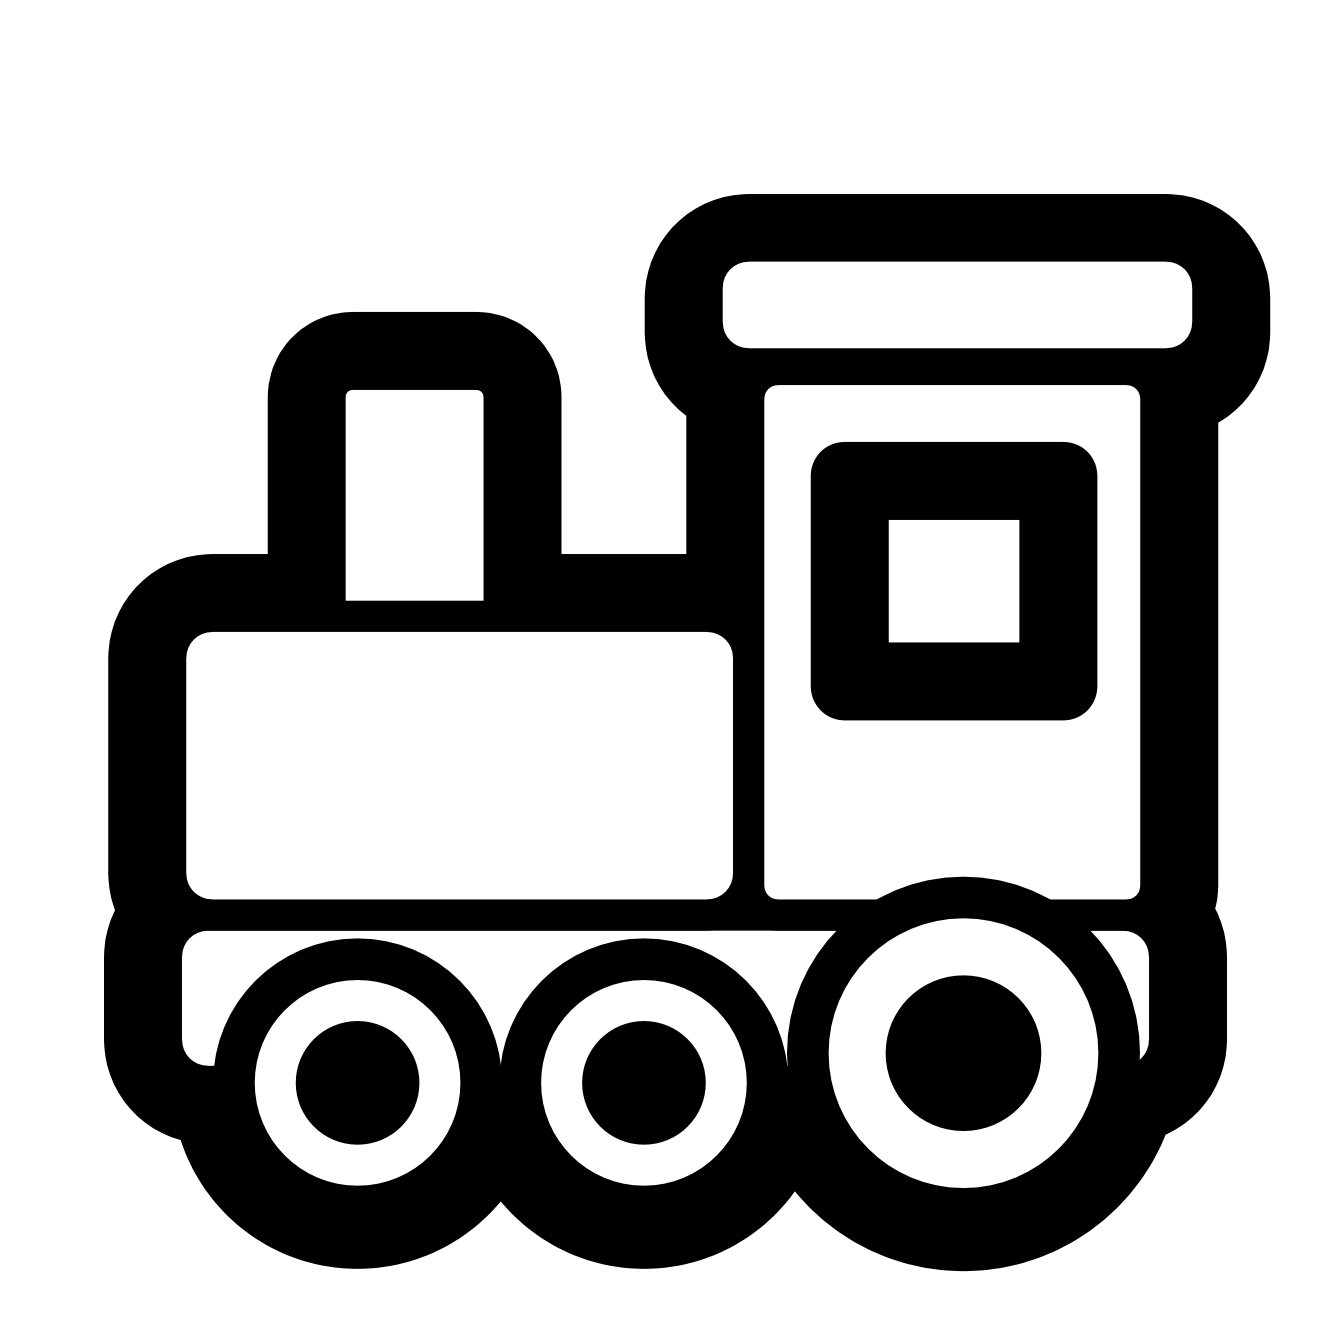 Toy Train Images - ClipArt | Clipart library - Free Clipart Images